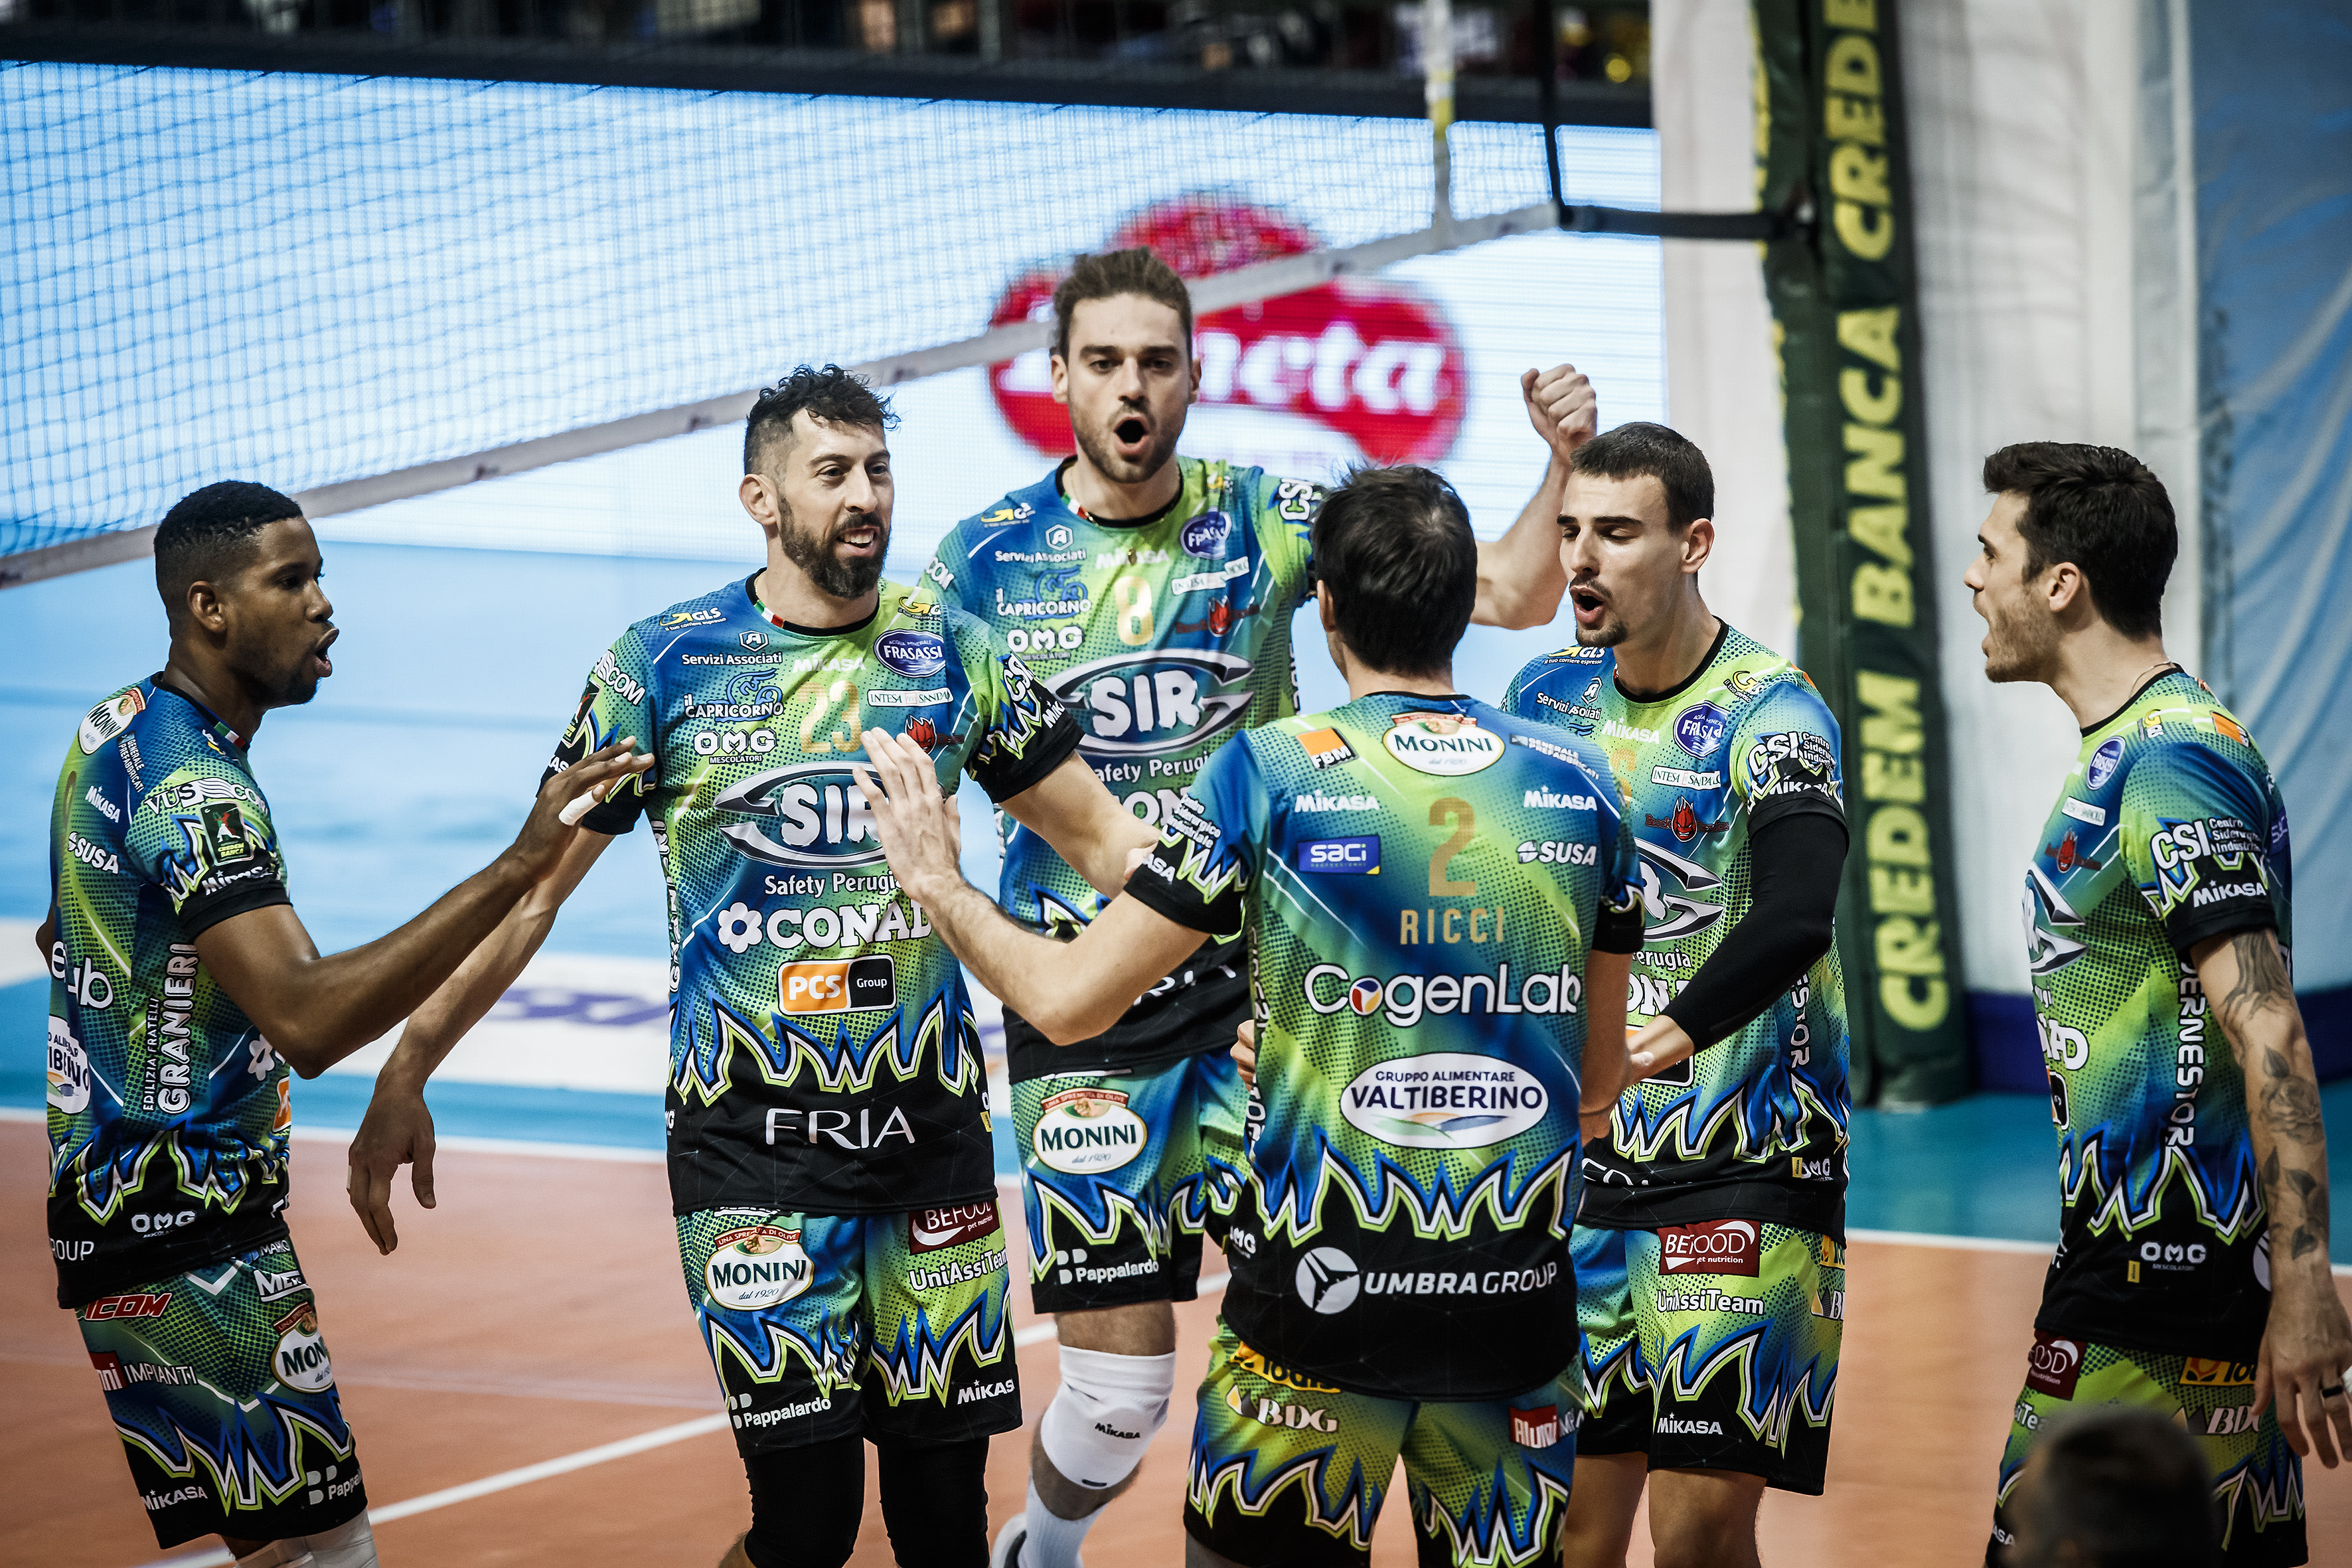 At least two more games in Perugia v Modena clash; Trentino a win away from SuperLega final volleyballworld